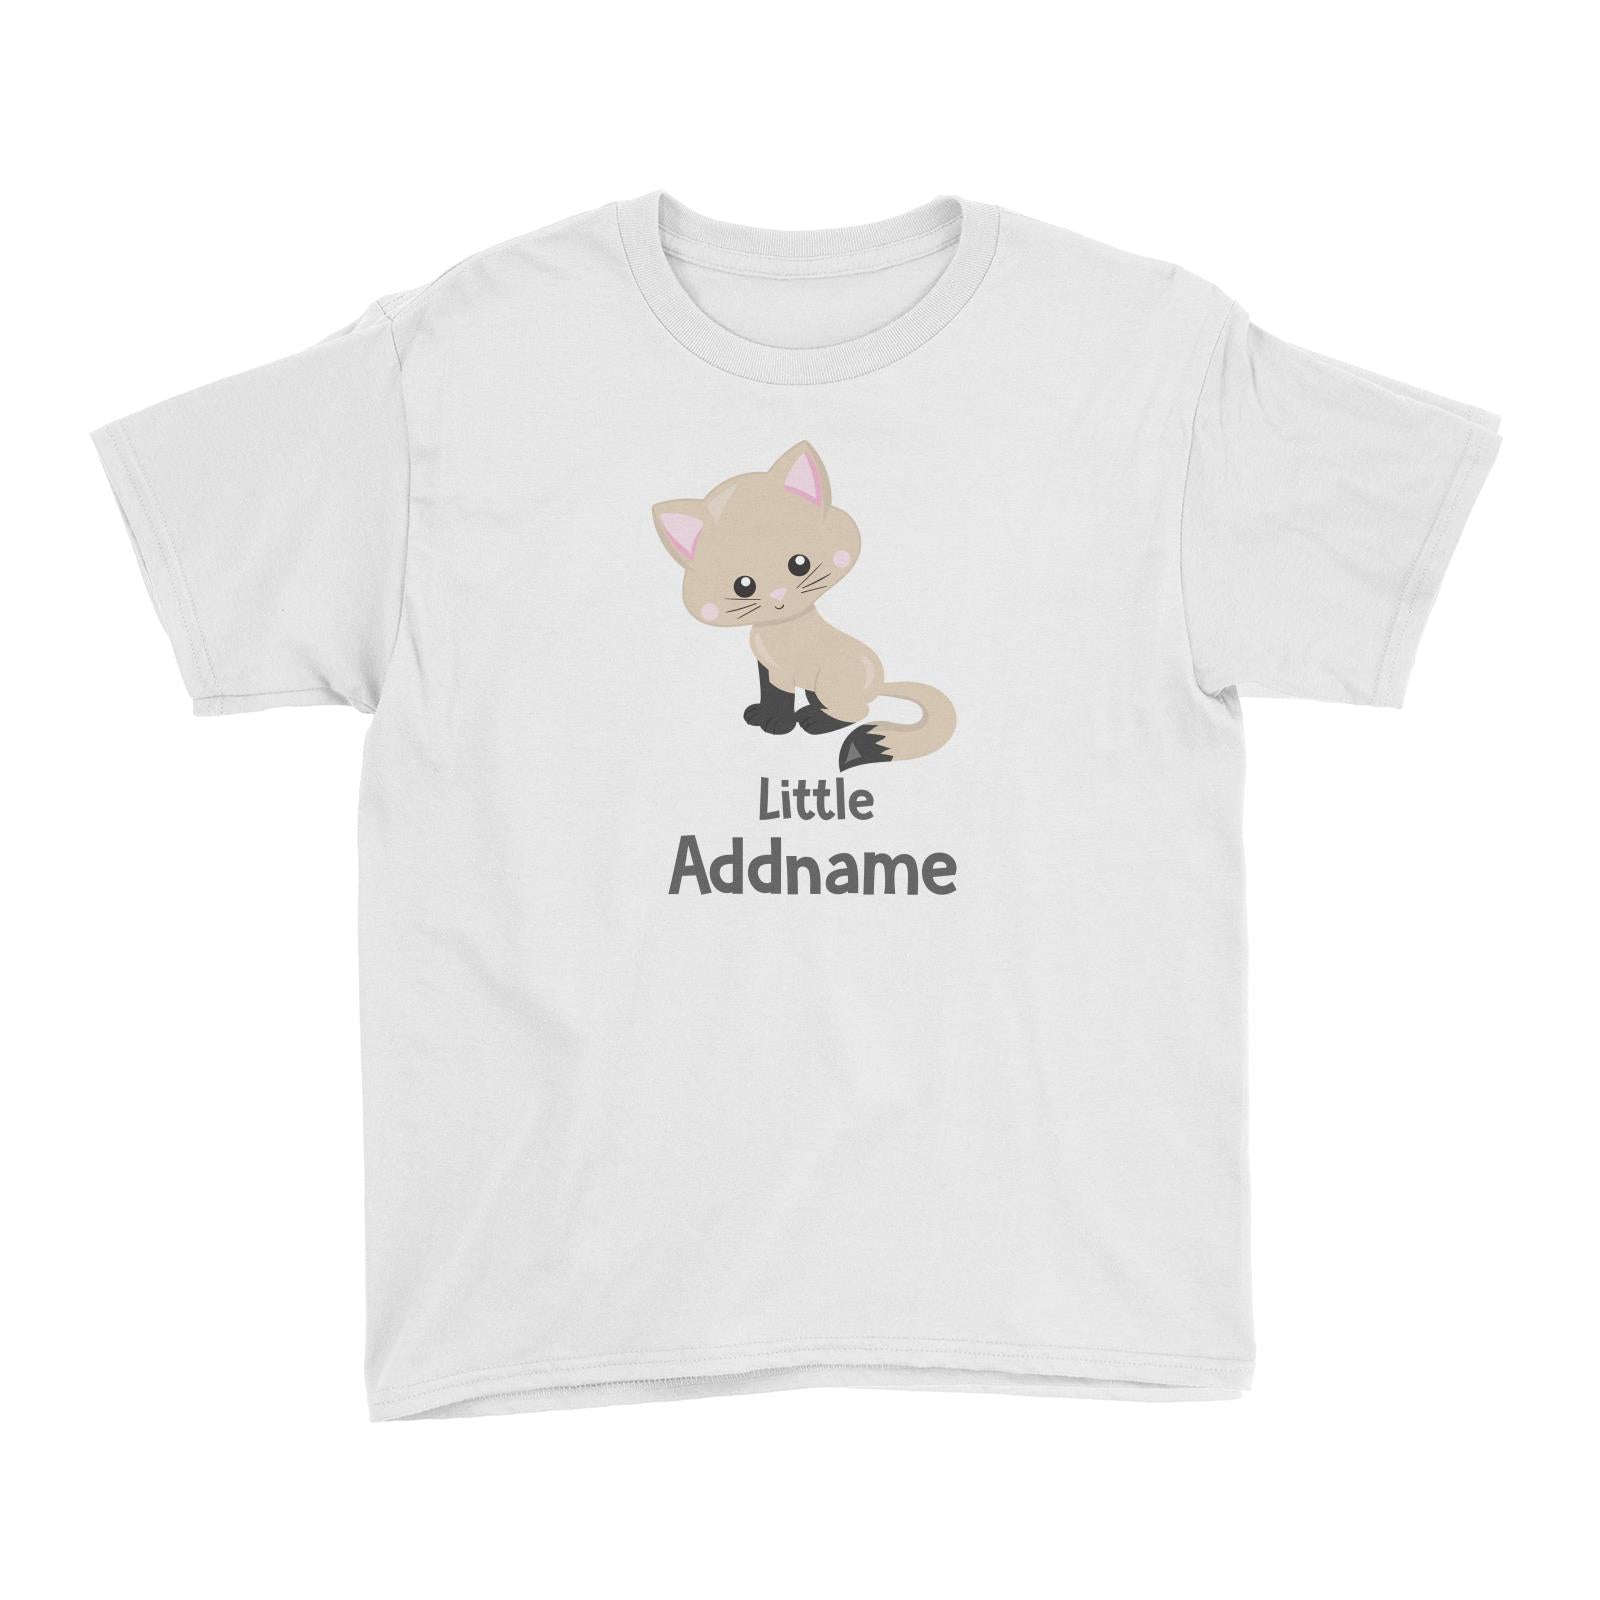 Adorable Cats Light Brown Cat with Black Legs Little Addname Kid's T-Shirt